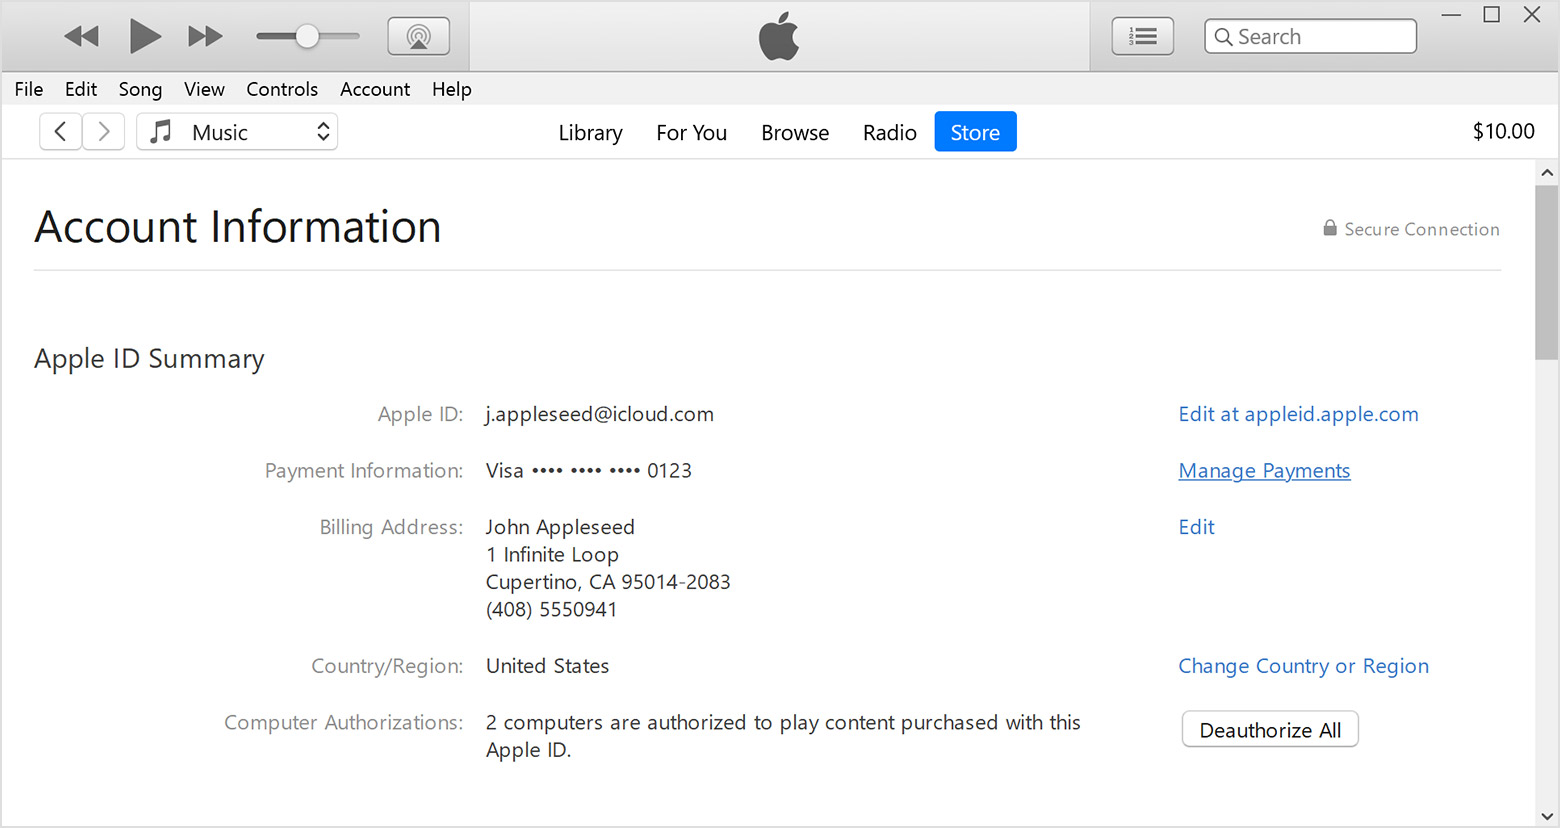 Account Information page in iTunes showing payment information, billing address, and other information related to Apple ID.